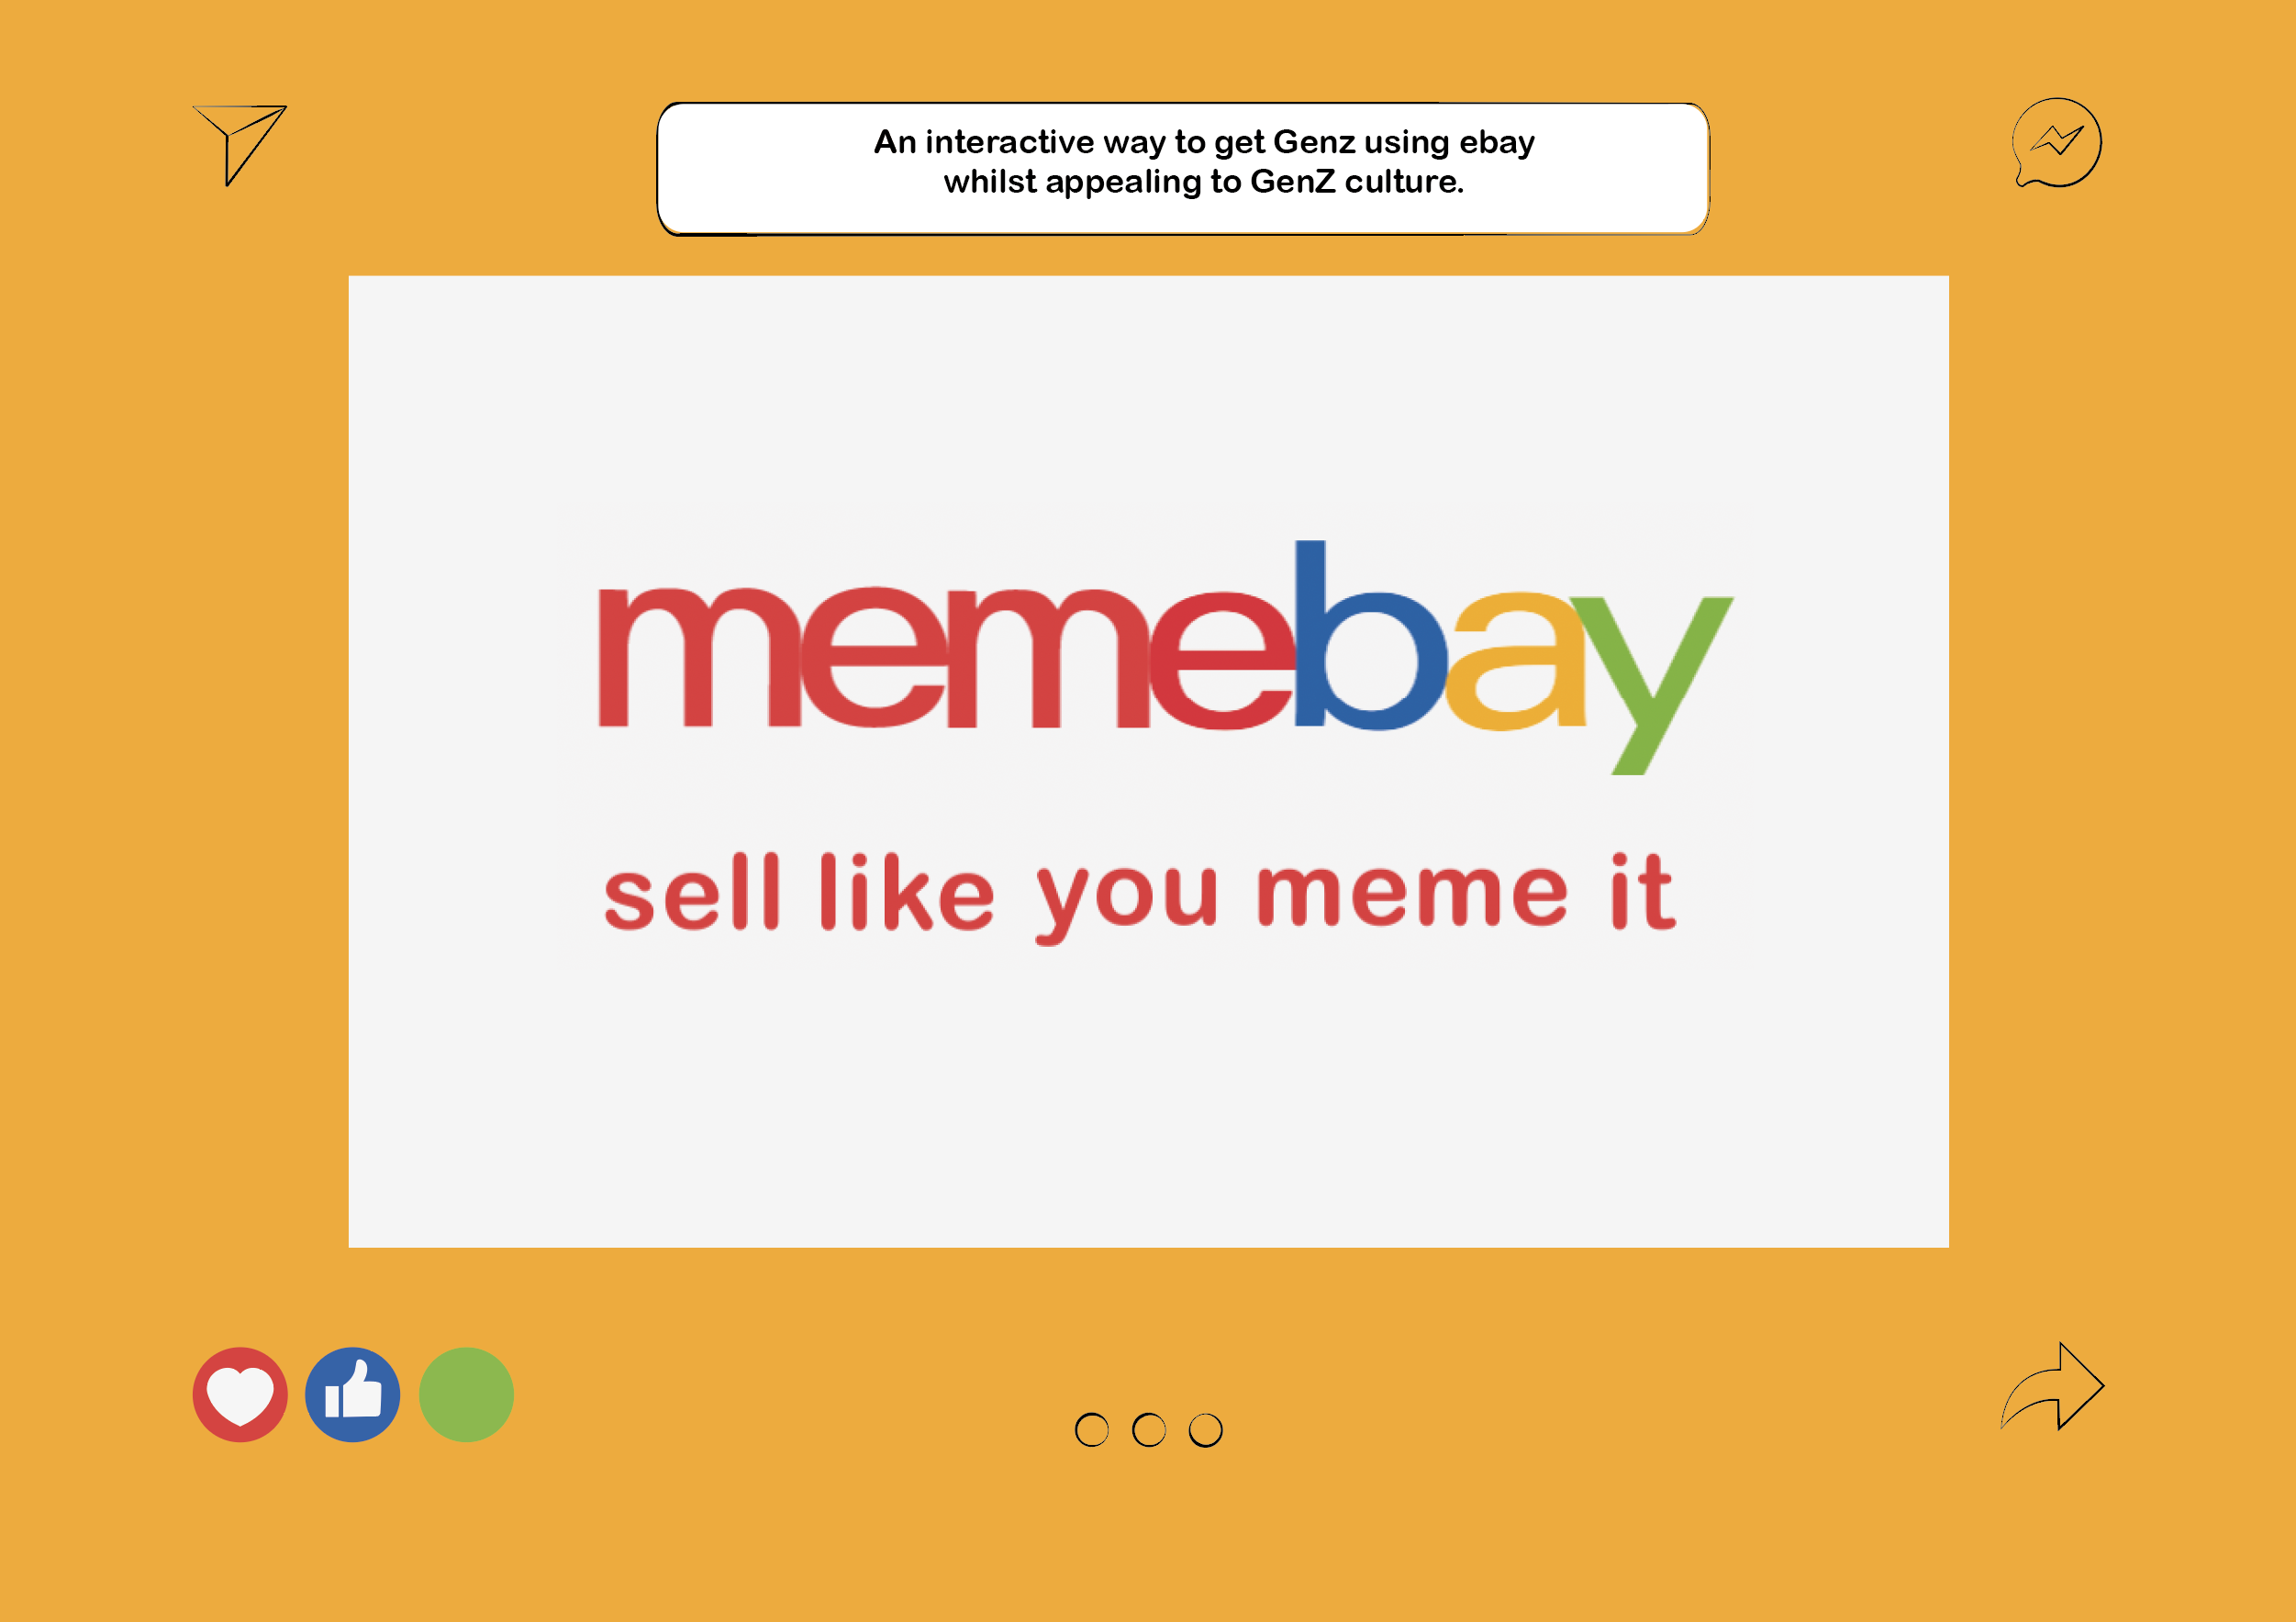 Advertising video introducing 'Memebay'. Thumbnail shows 'memebay' in colourful lettering with 'sell like you meme it' underneat in red on yellow background.